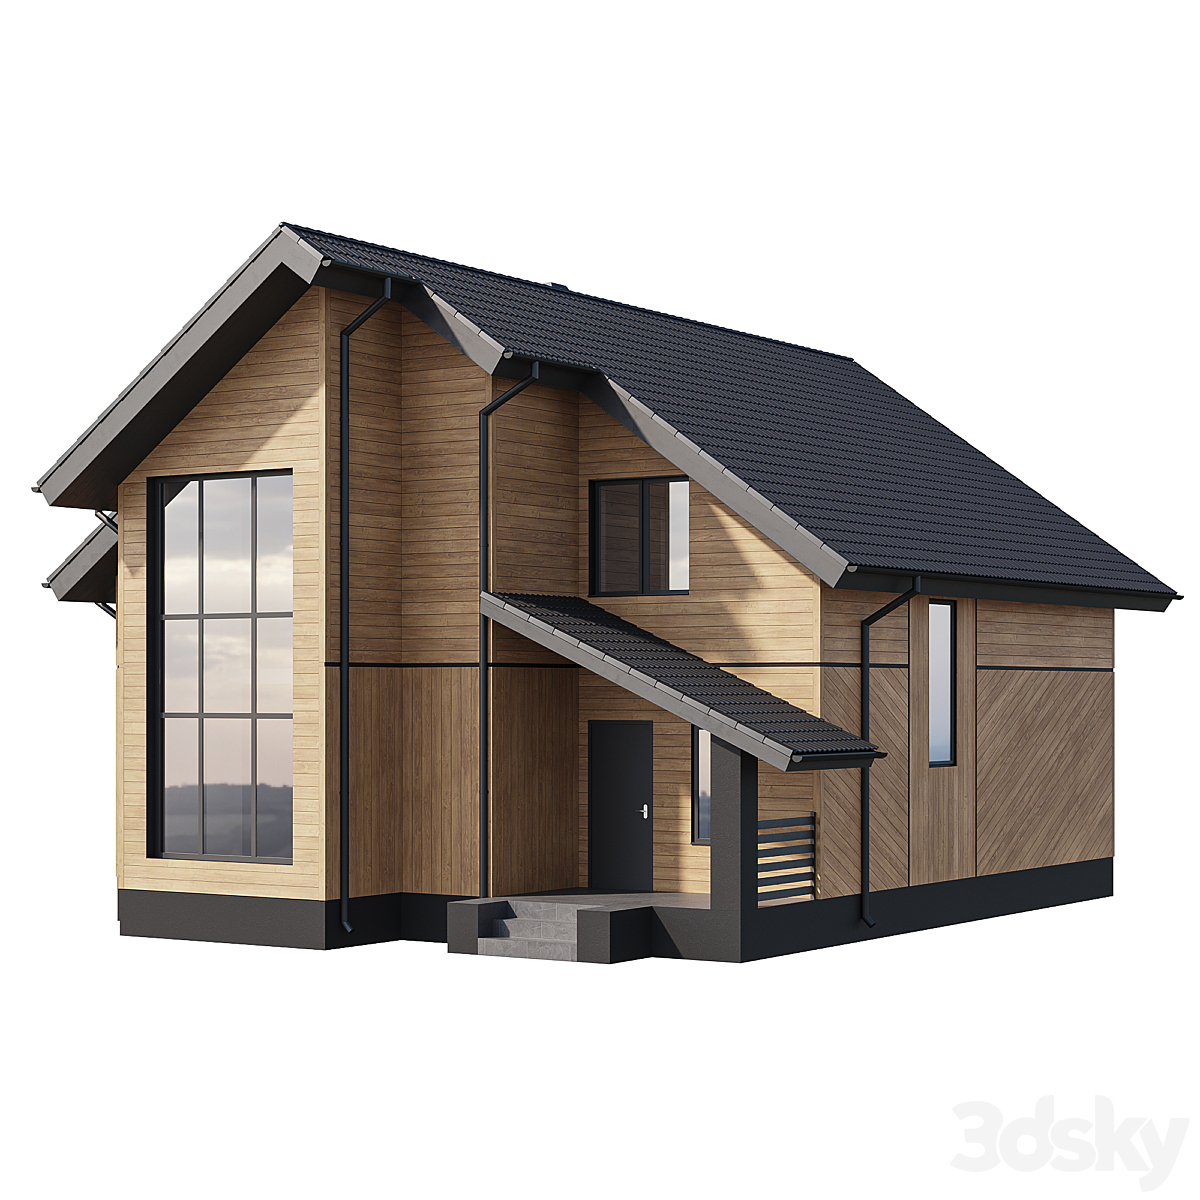 Two-storey wooden house with a complex pitched roof